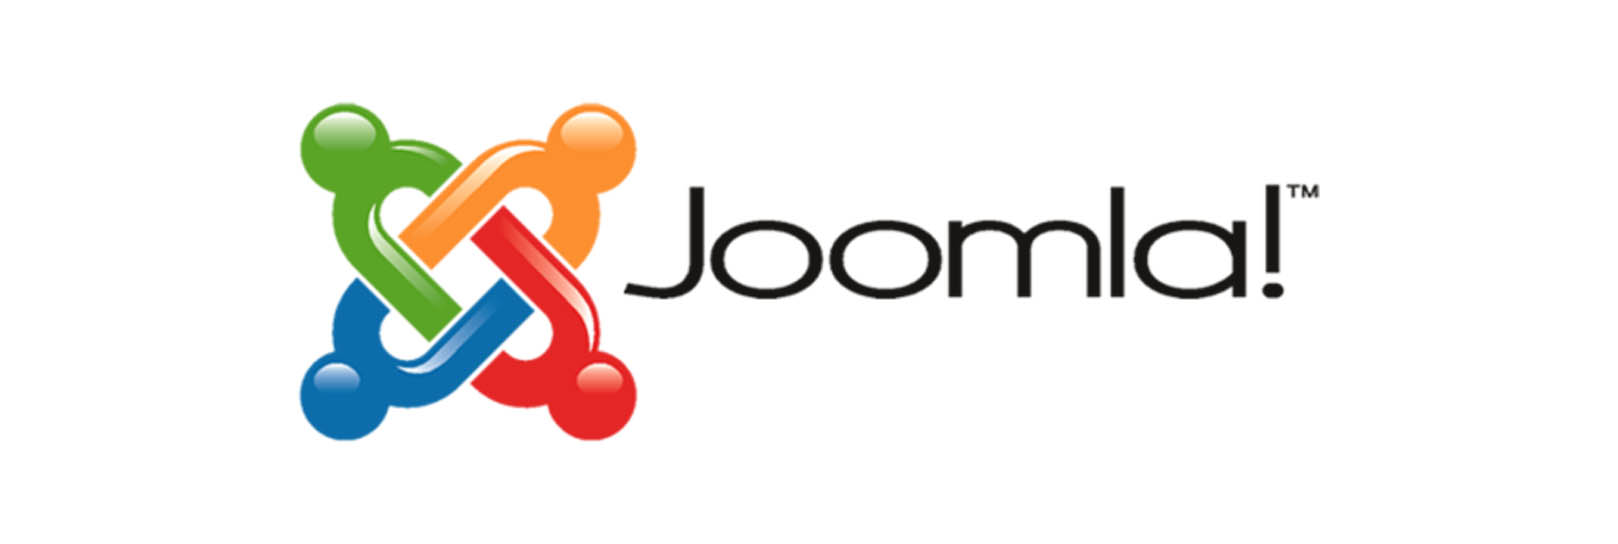 How can I upgrade my Joomla installation to the latest version?